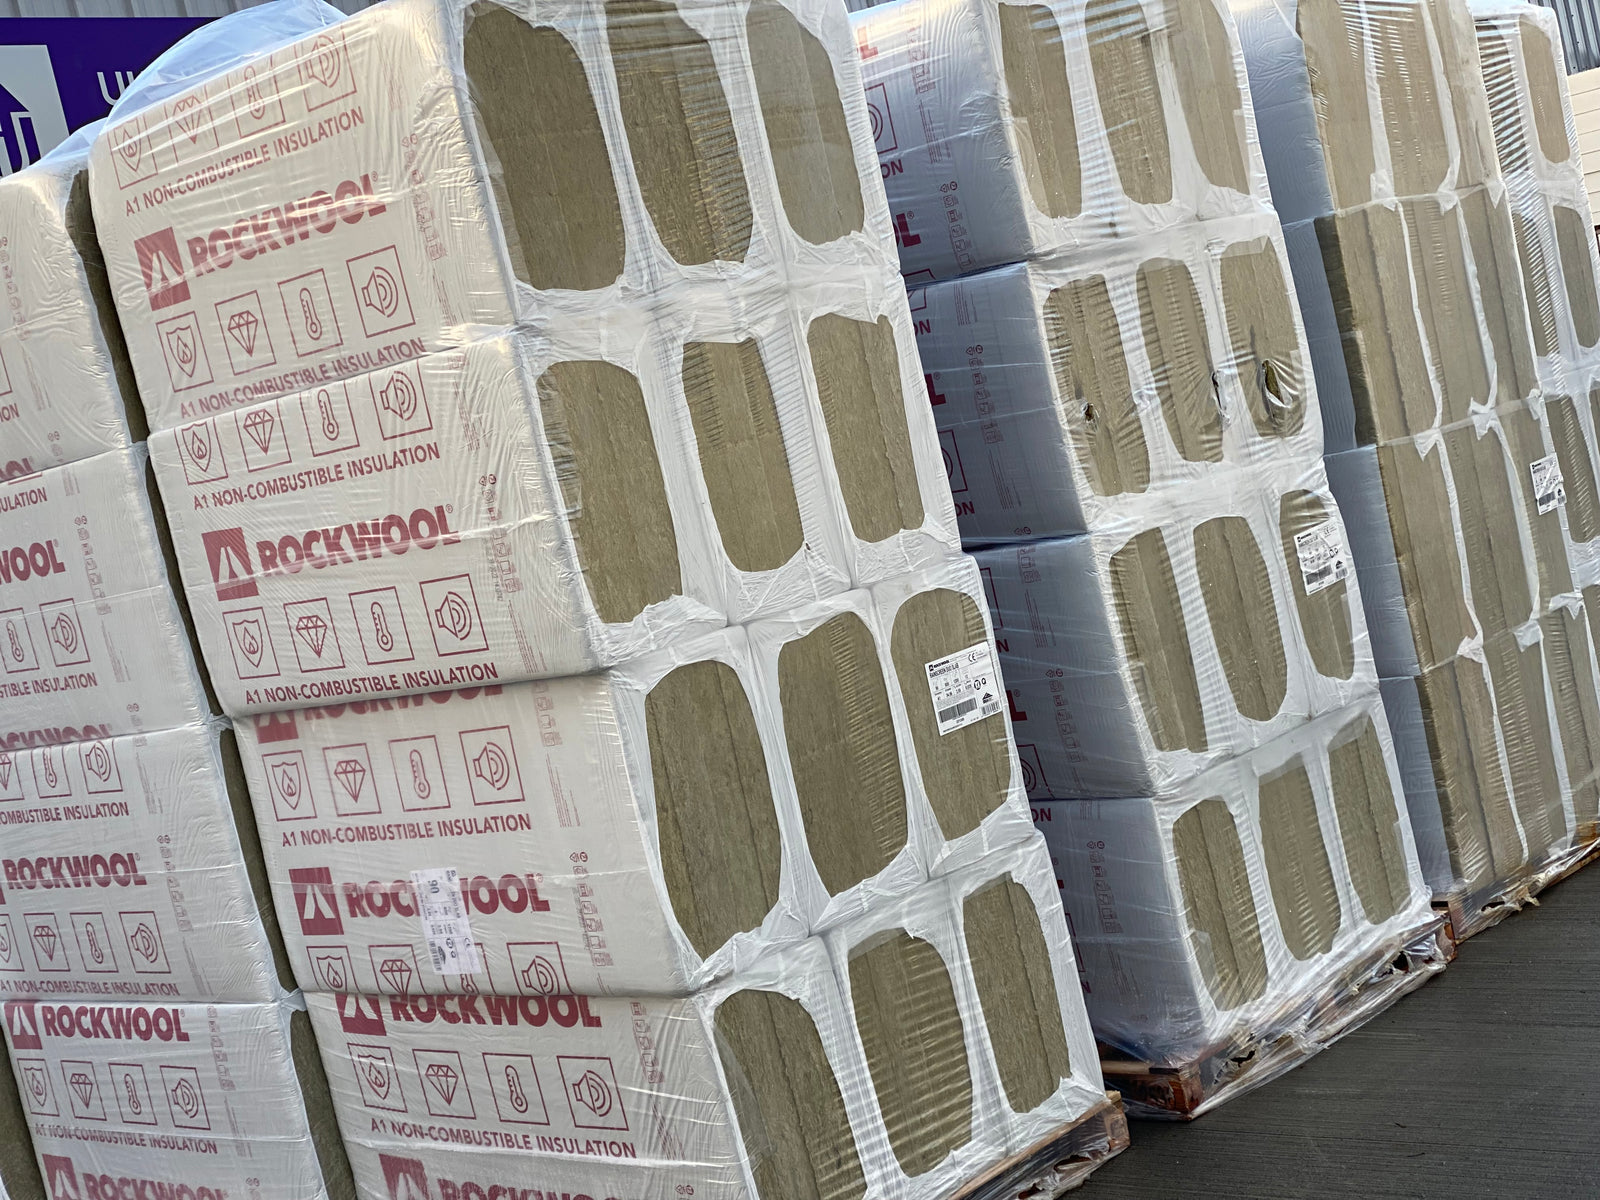 Fire rated Rockwool